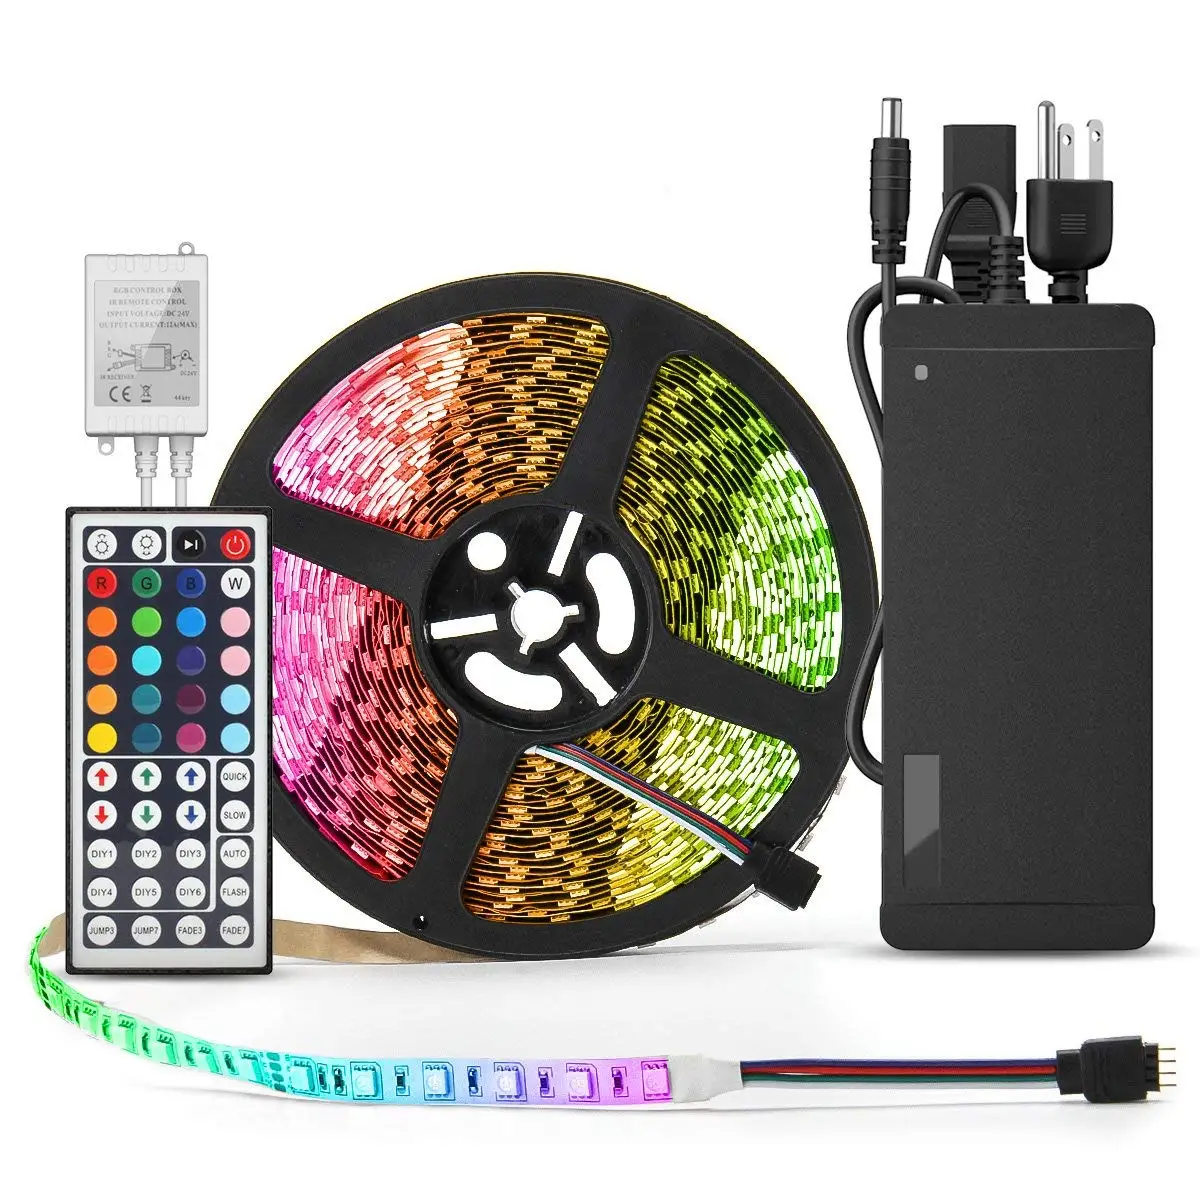 Amazon/Ebay Hot Sale 16.4ft 5050 Flexible RGB waterproof led strip light with 44 Key IR Remote Controller 5A Power Supply